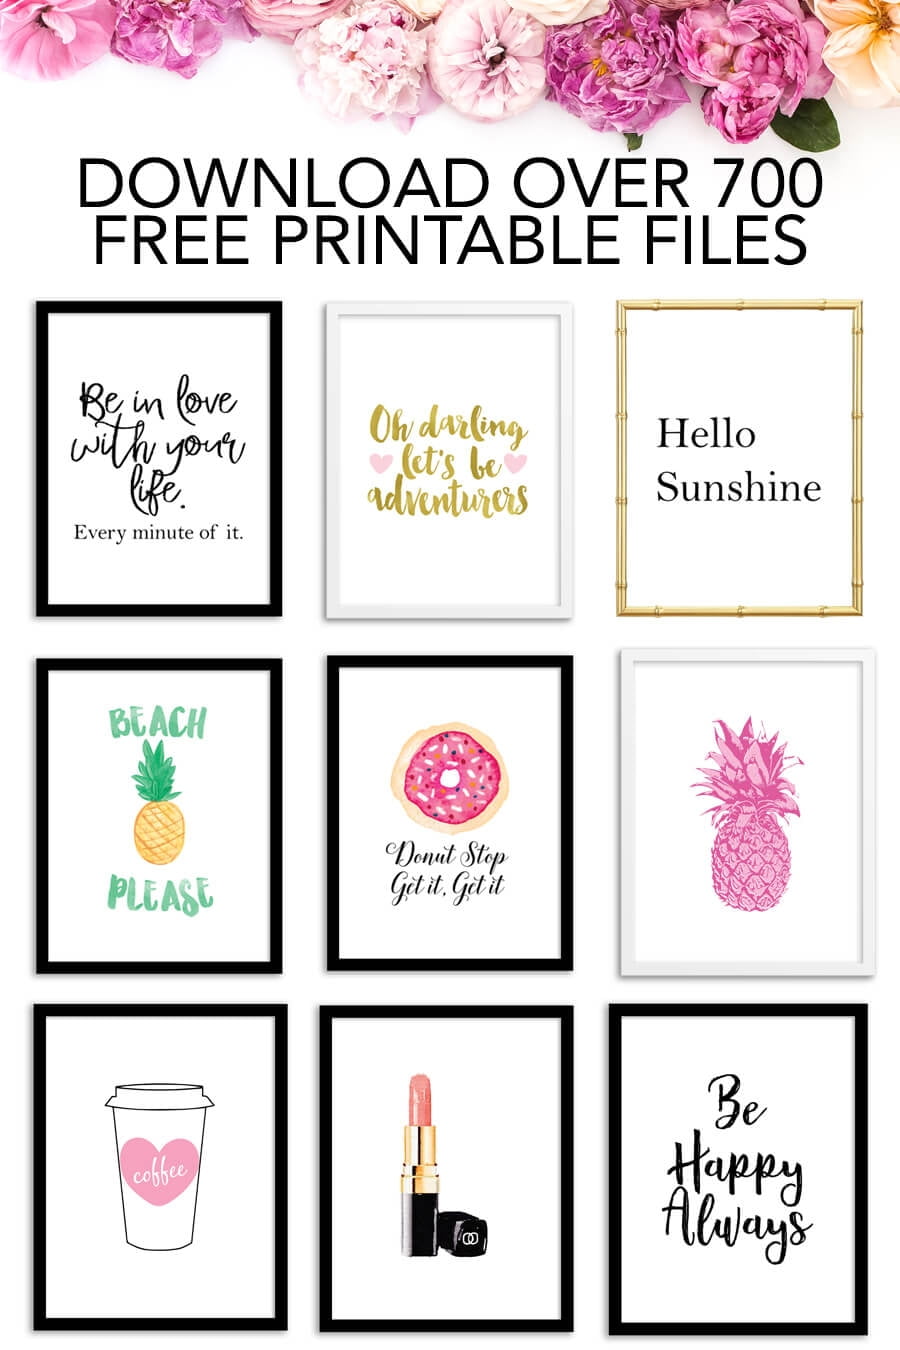 Printable Pictures To Download Free